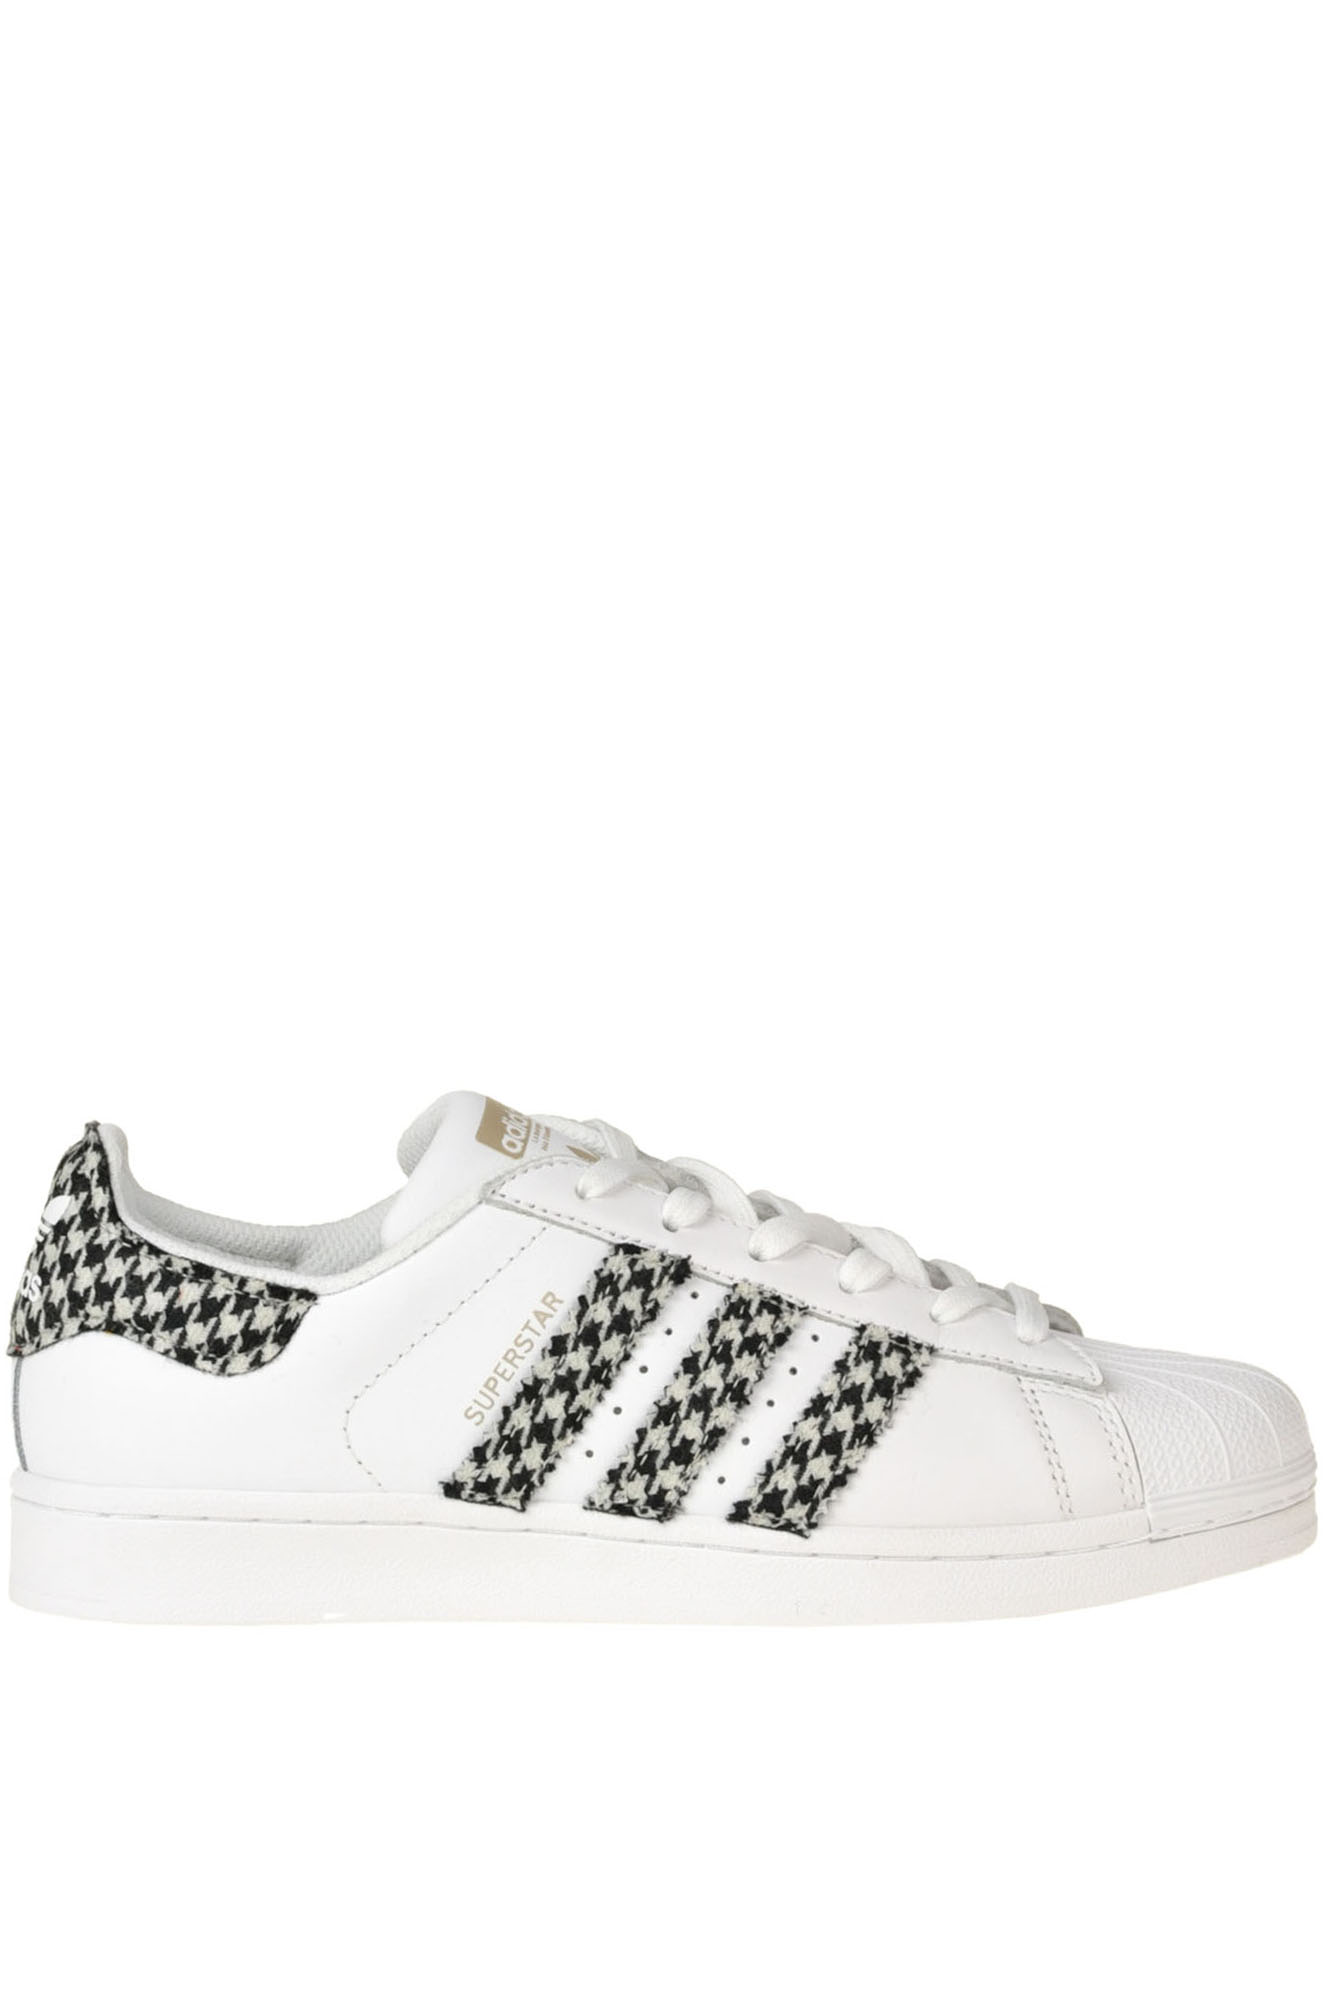 ADIDAS BY DRESSED SUPERSTAR CUSTOMIZED SNEAKERS